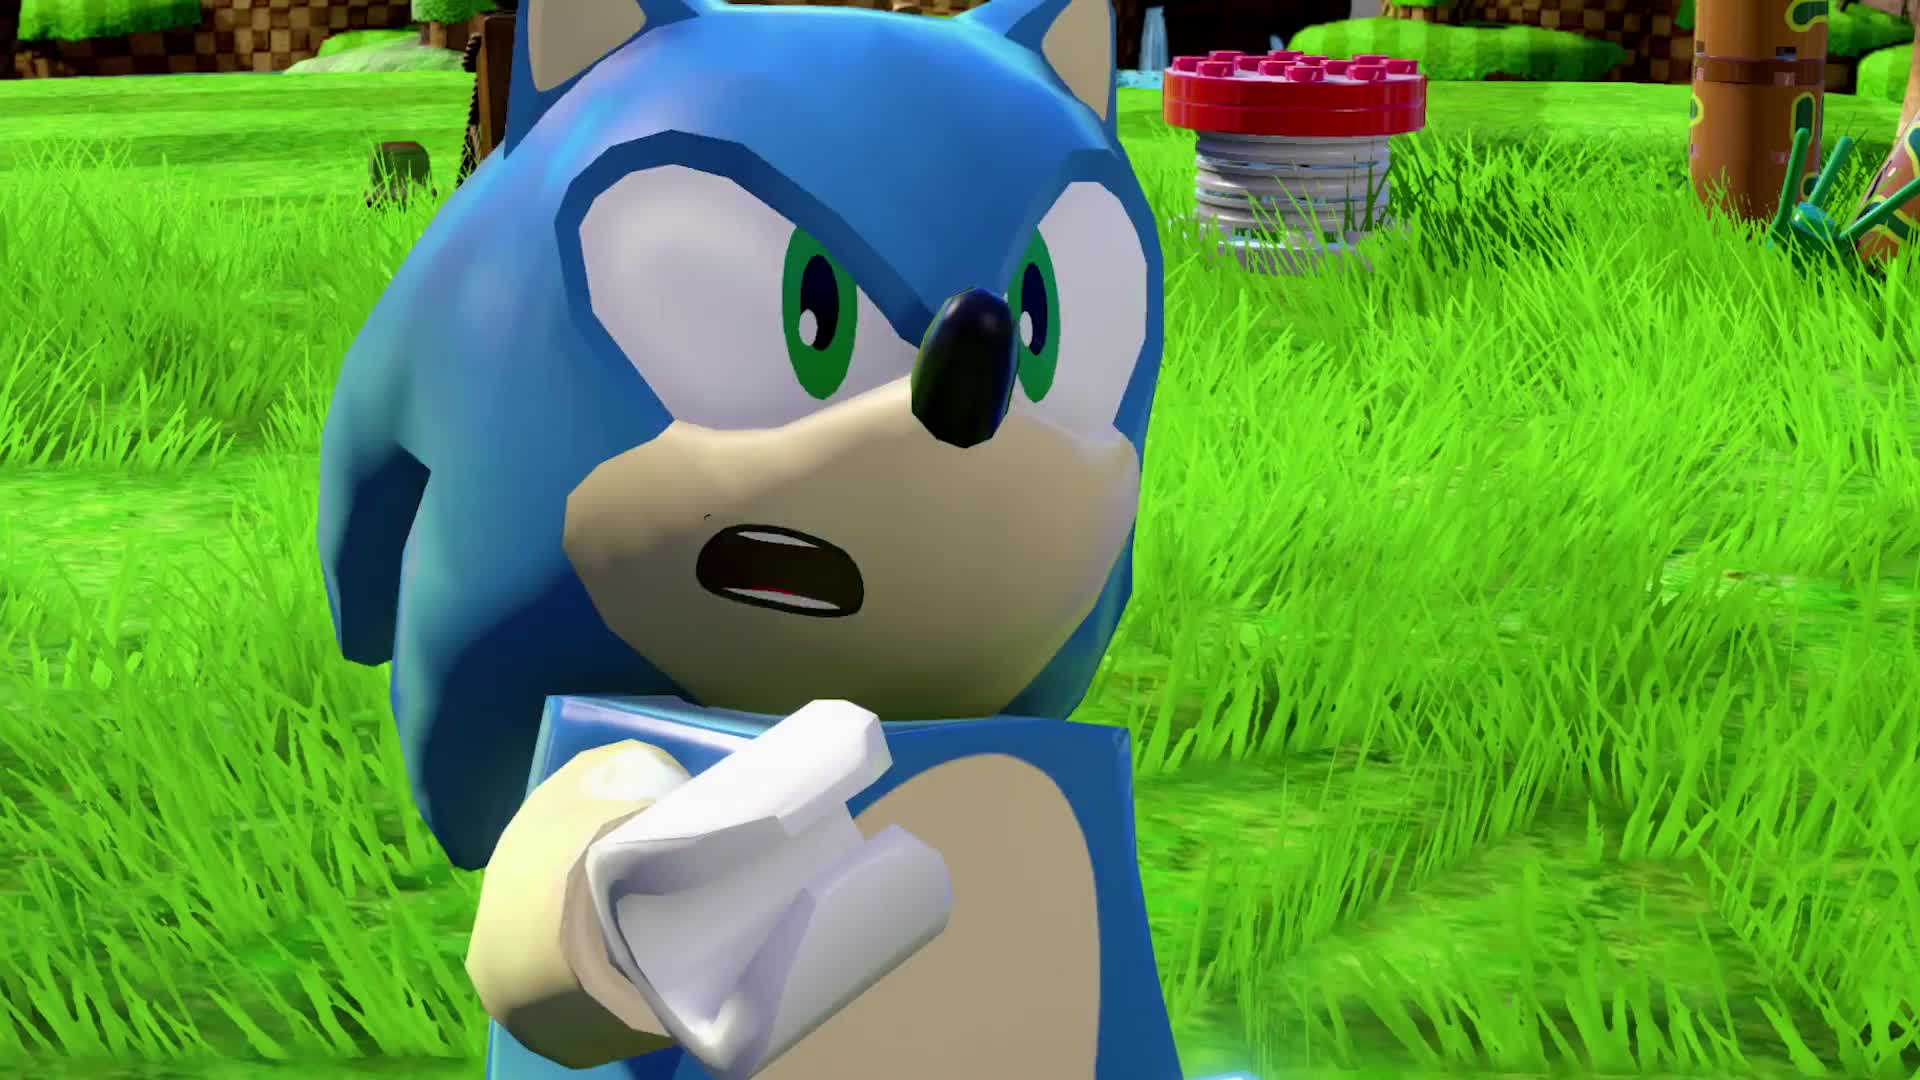 LEGO Dimensions: Sonic the Hedgehog - Official Trailer